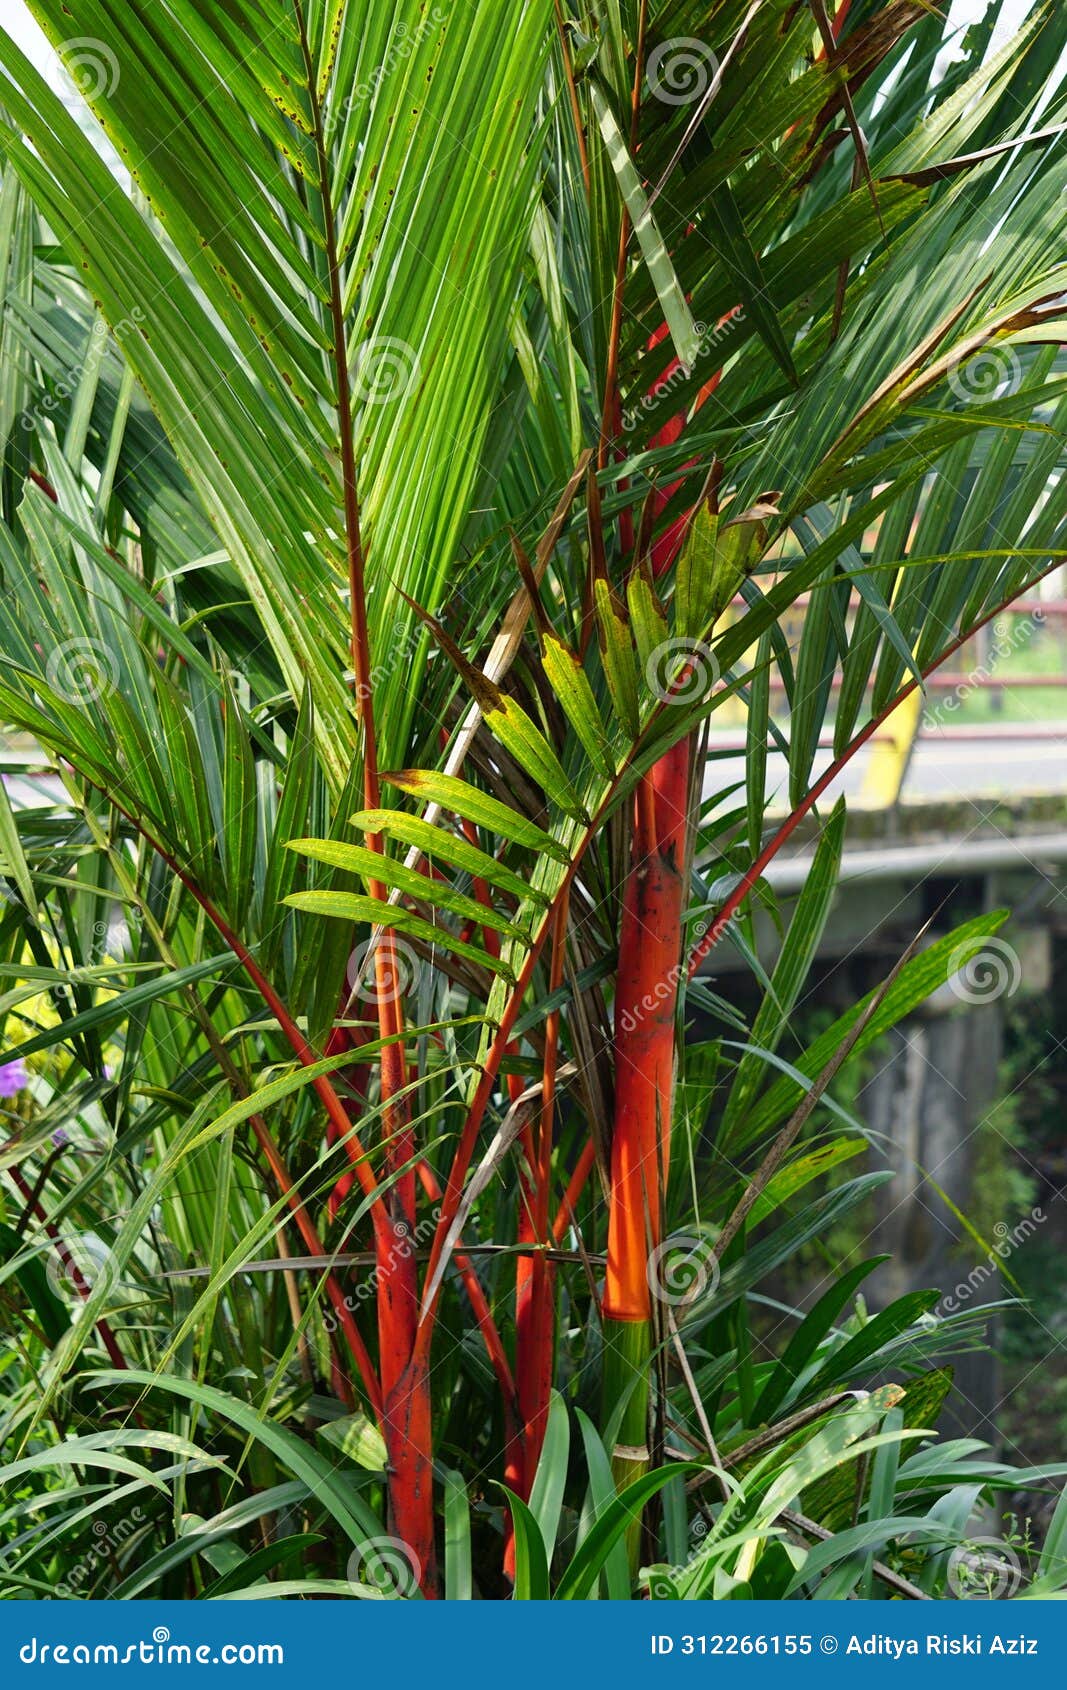 cyrtostachys renda (also known red sealing wax palm, red palm, rajah palm) in the garden